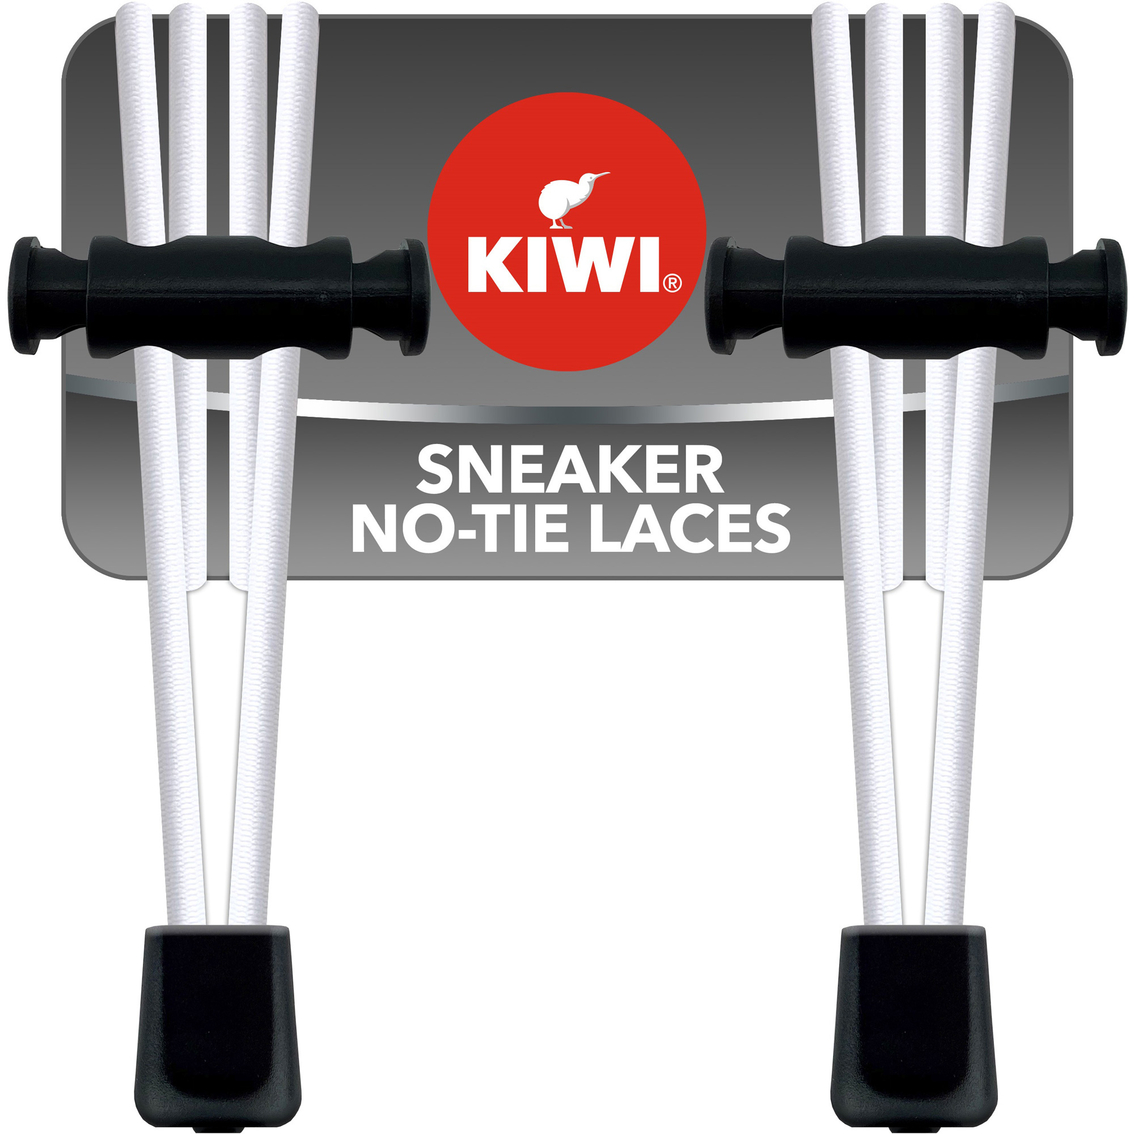 Kiwi Sneaker No Tie Shoe Laces One Size Fits All 1 pair - Image 2 of 2